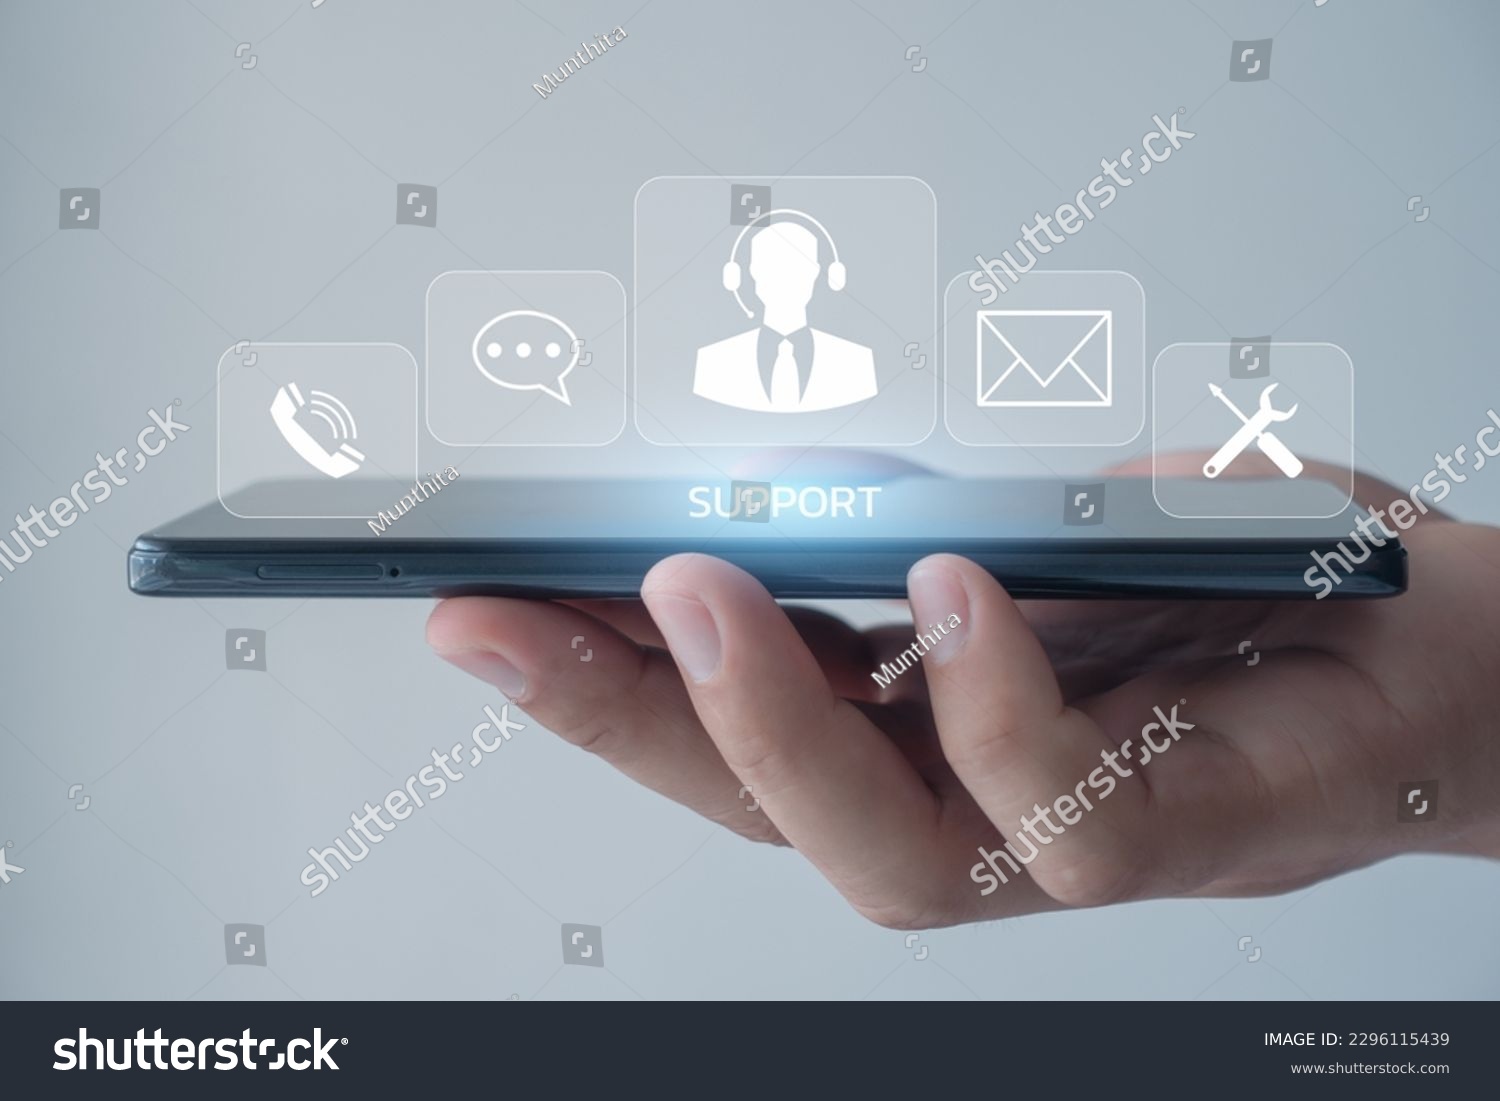 Technical Support Center Customer Service Internet Business Technology Concept. Service support customer help call center Business technology button on virtual screen. Person hand using a smartphone. #2296115439